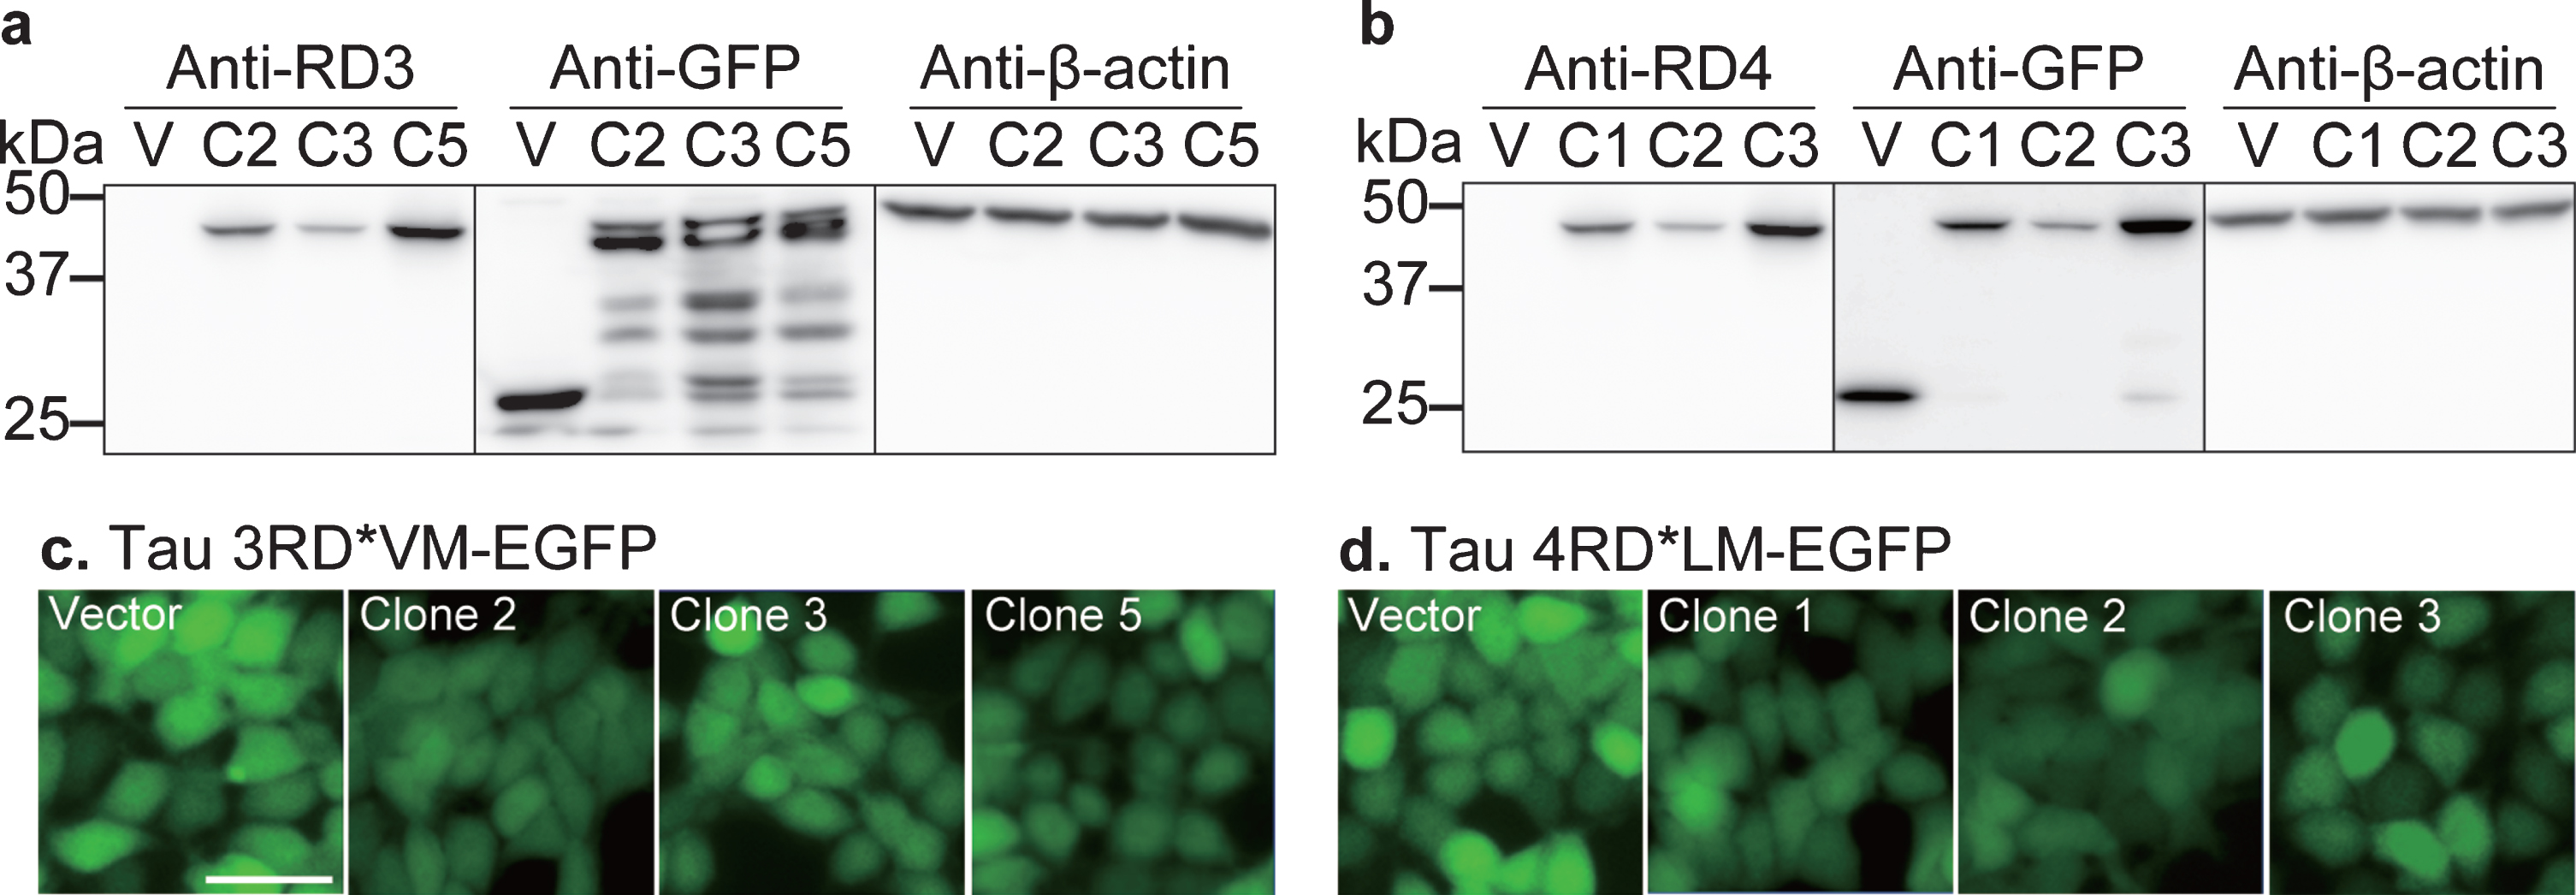 Development of a cellular model of tau propagation. Validation of (a) 3RD*VM-EGFP and (b) 4RD*LM-EGFP expression. Stable cells transfected with vector plasmid (V) and three stable selected clones (clone 2 (C2), clone 3 (C3), and clone 5 (C5) in 3RD*VM-EGFP and C1, C2, and C3 in 4RD*LM-EGFP) were probed with anti-tau three- or four-repeat isoforms (3RD or 4RD), anti-GFP, and anti-β-actin antibodies on separate membranes. A protein ladder (M) was used as a size reference. Representative images of HEK 293T cells expressing (c) 3RD*VM-EGFP and (d) 4RD*LM-EGFP. Scale bar = 20μm.